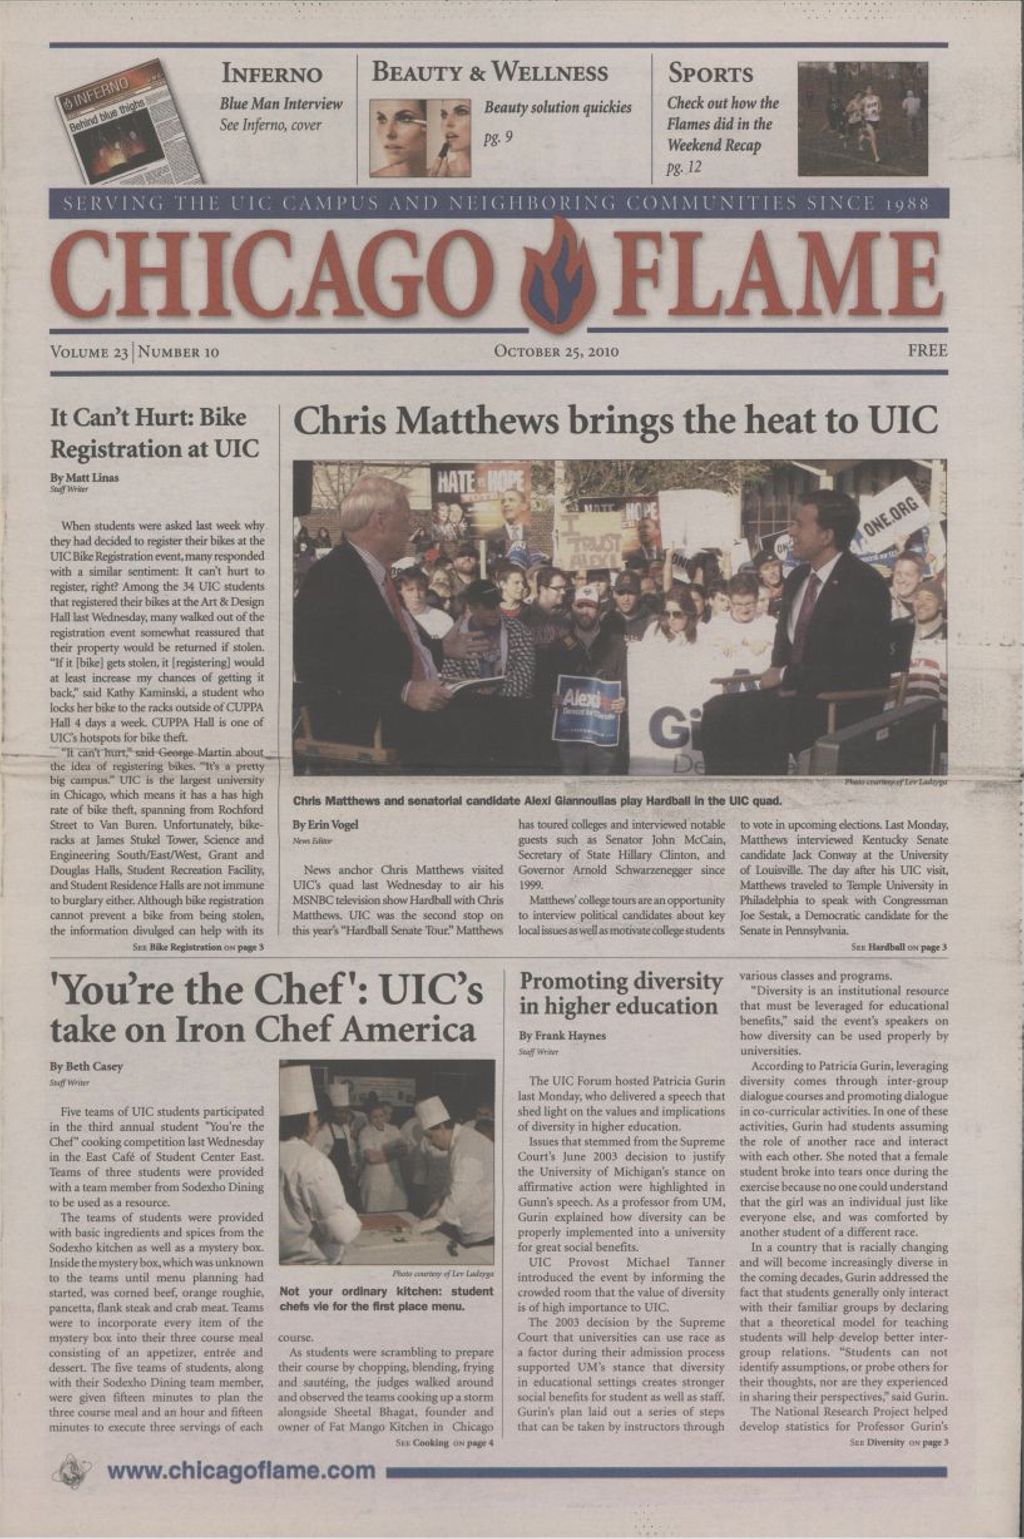 Chicago Flame (October 25, 2010)